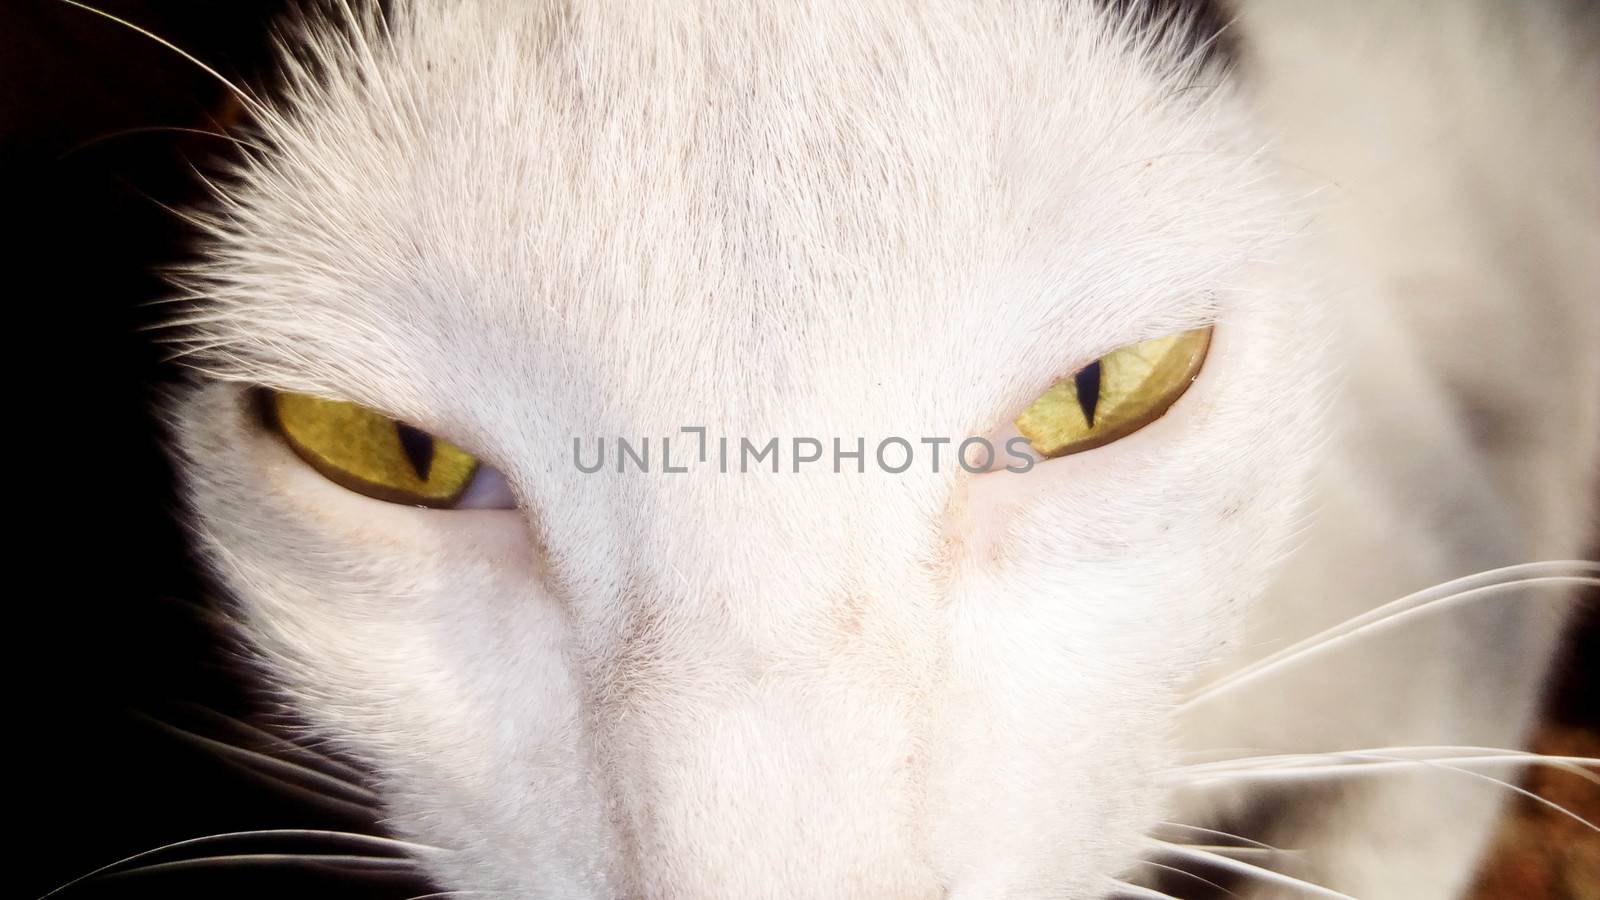 black and white cat face with eye by jahidul2358